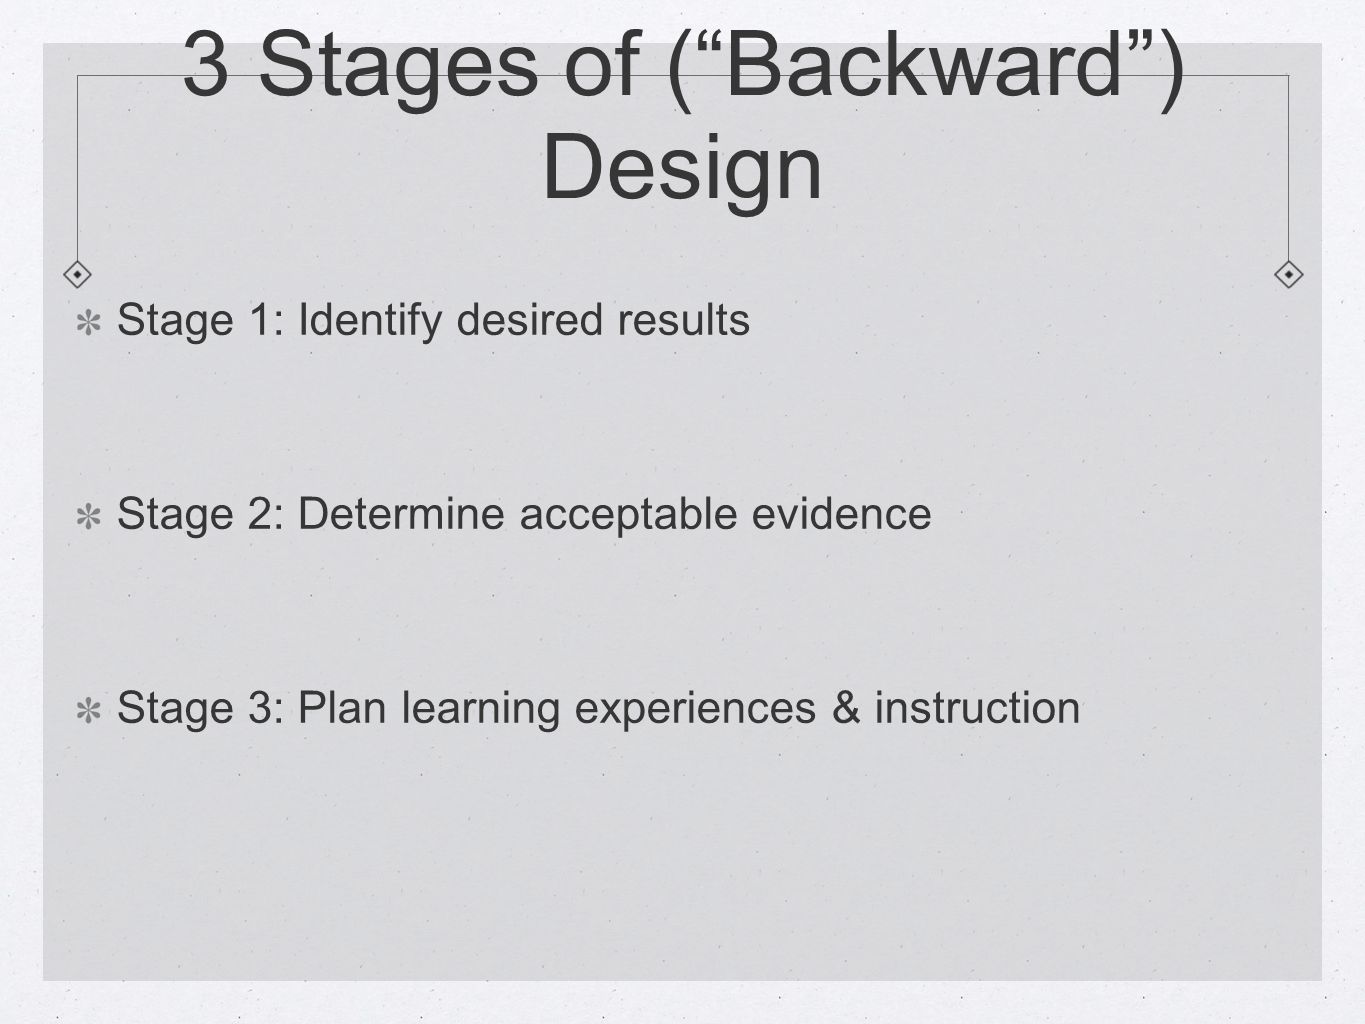 3 Stages of (Backward) Design Stage 1: Identify desired results Stage 2: Determine acceptable evidence Stage 3: Plan learning experiences & instruction